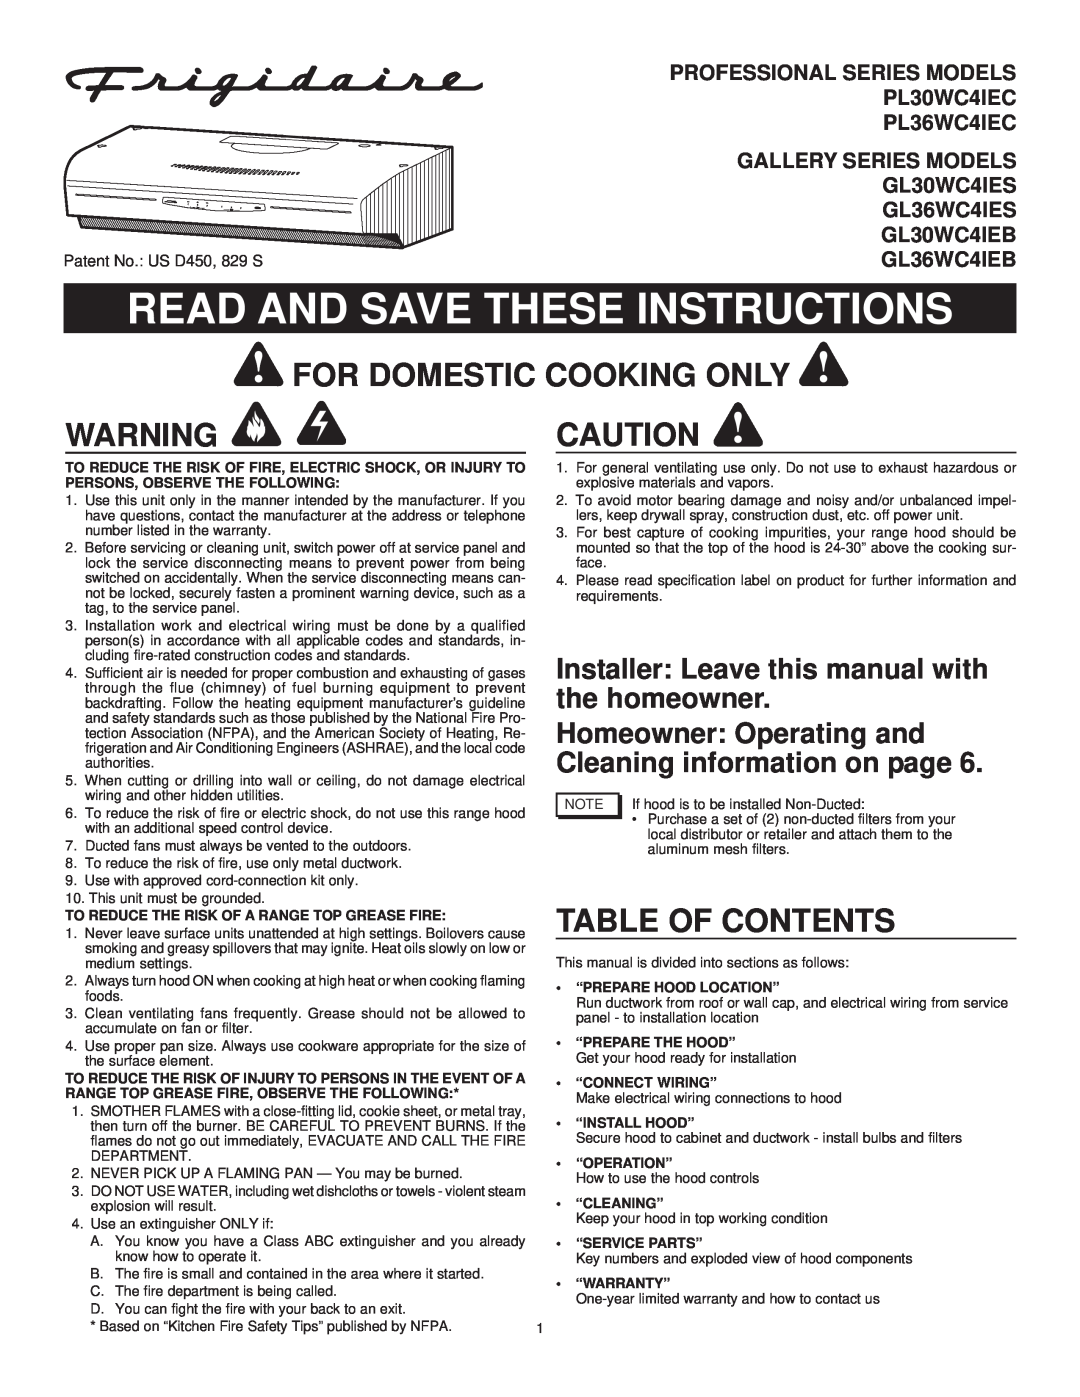 Frigidaire GL36WC4IEB, PL30WC4IEC manual For Domestic Cooking Only, Table Of Contents, Read And Save These Instructions 